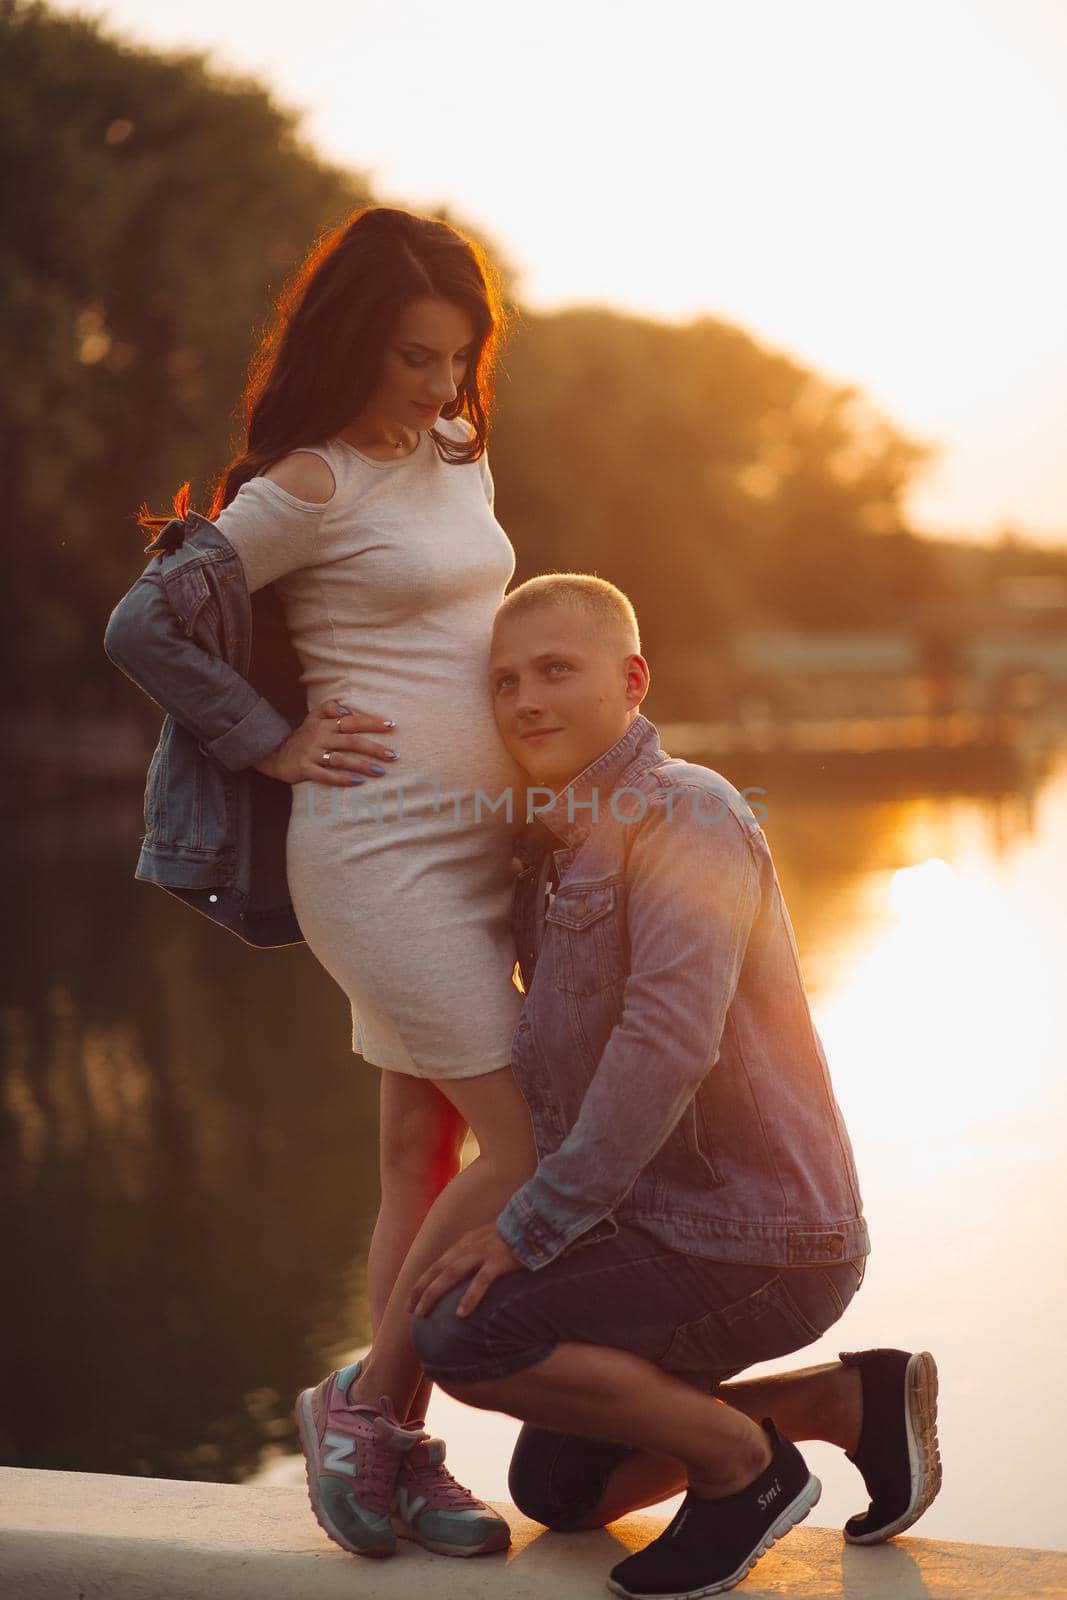 Full length of delighted man in denim jacket listening and embracing his future baby inside his wife s belly. They are in beautiful park by the river or lake at sunset.